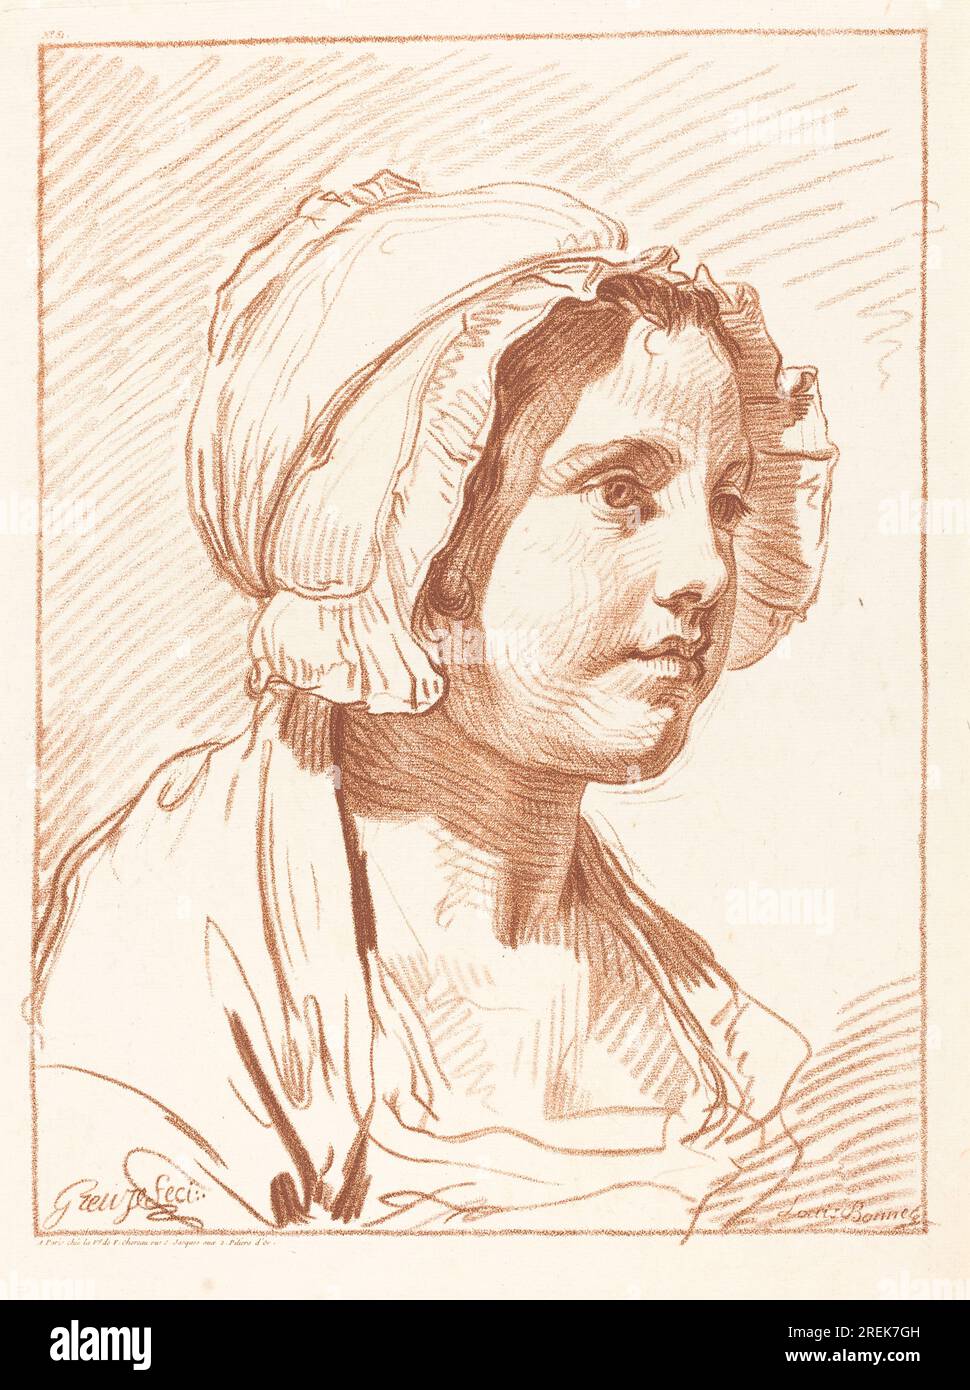 'Louis-Marin Bonnet after Jean-Baptiste Greuze, Head of a Young Woman Wearing a Cap, before 1764, chalk manner printed in red ink, plate: 46.5 x 34.6 cm (18 5/16 x 13 5/8 in.) overall (outside framing line): 42.7 x 31.9 cm (16 13/16 x 12 9/16 in.), Gift of Ivan E. and Winifred Phillips, 1997.17.1' Stock Photo